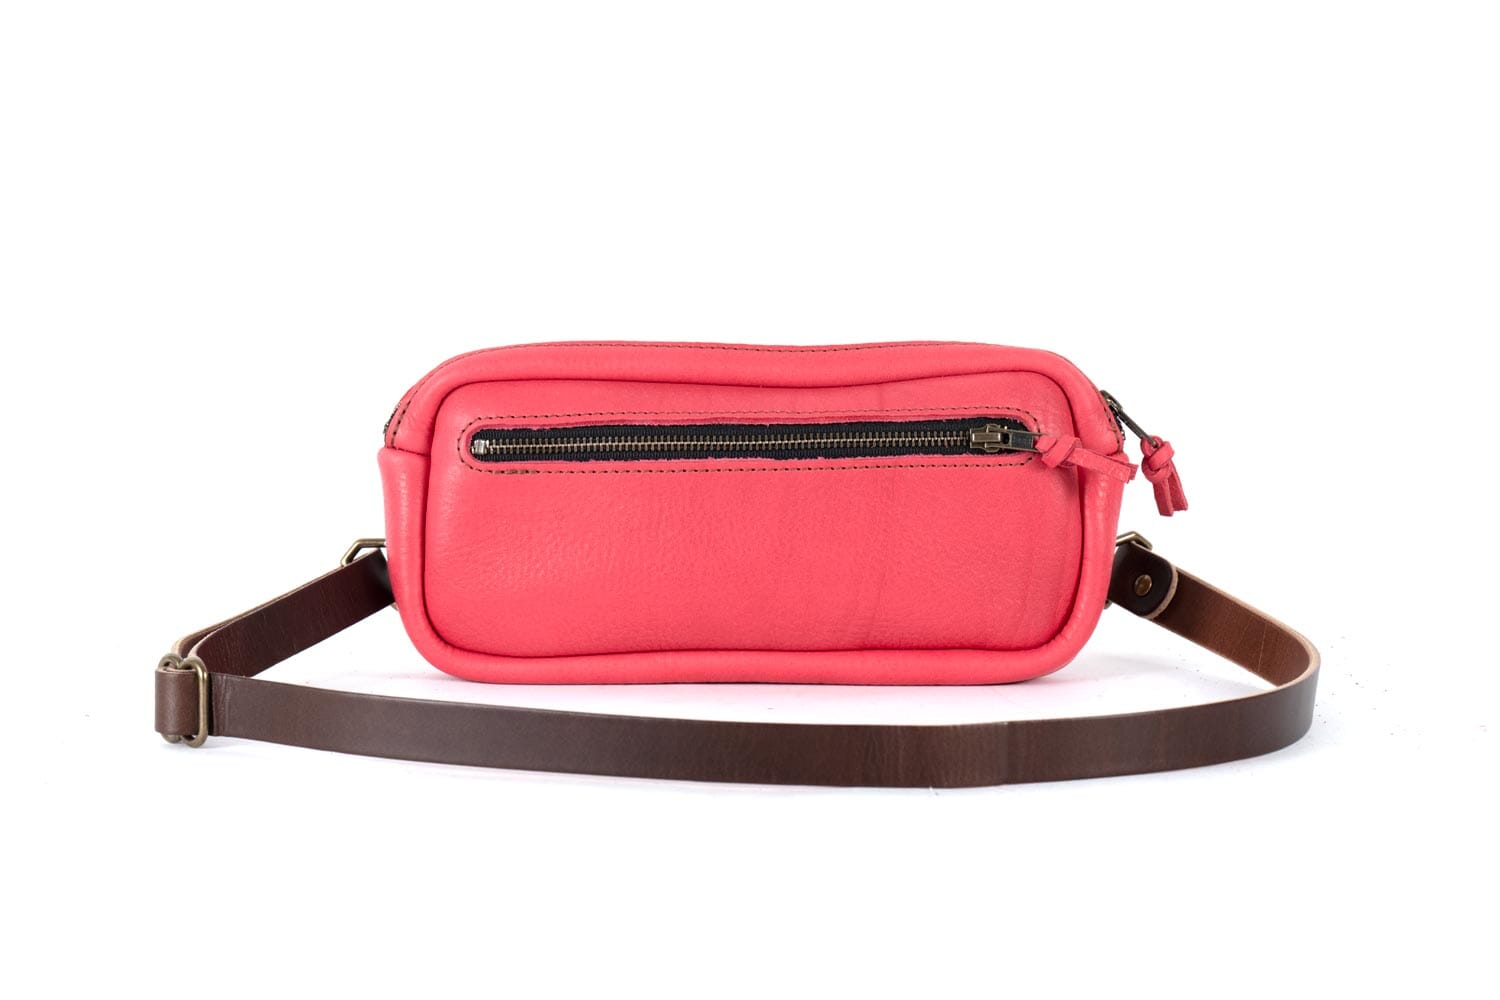 LEATHER FANNY PACK / LEATHER WAIST BAG - DELUXE - PINK